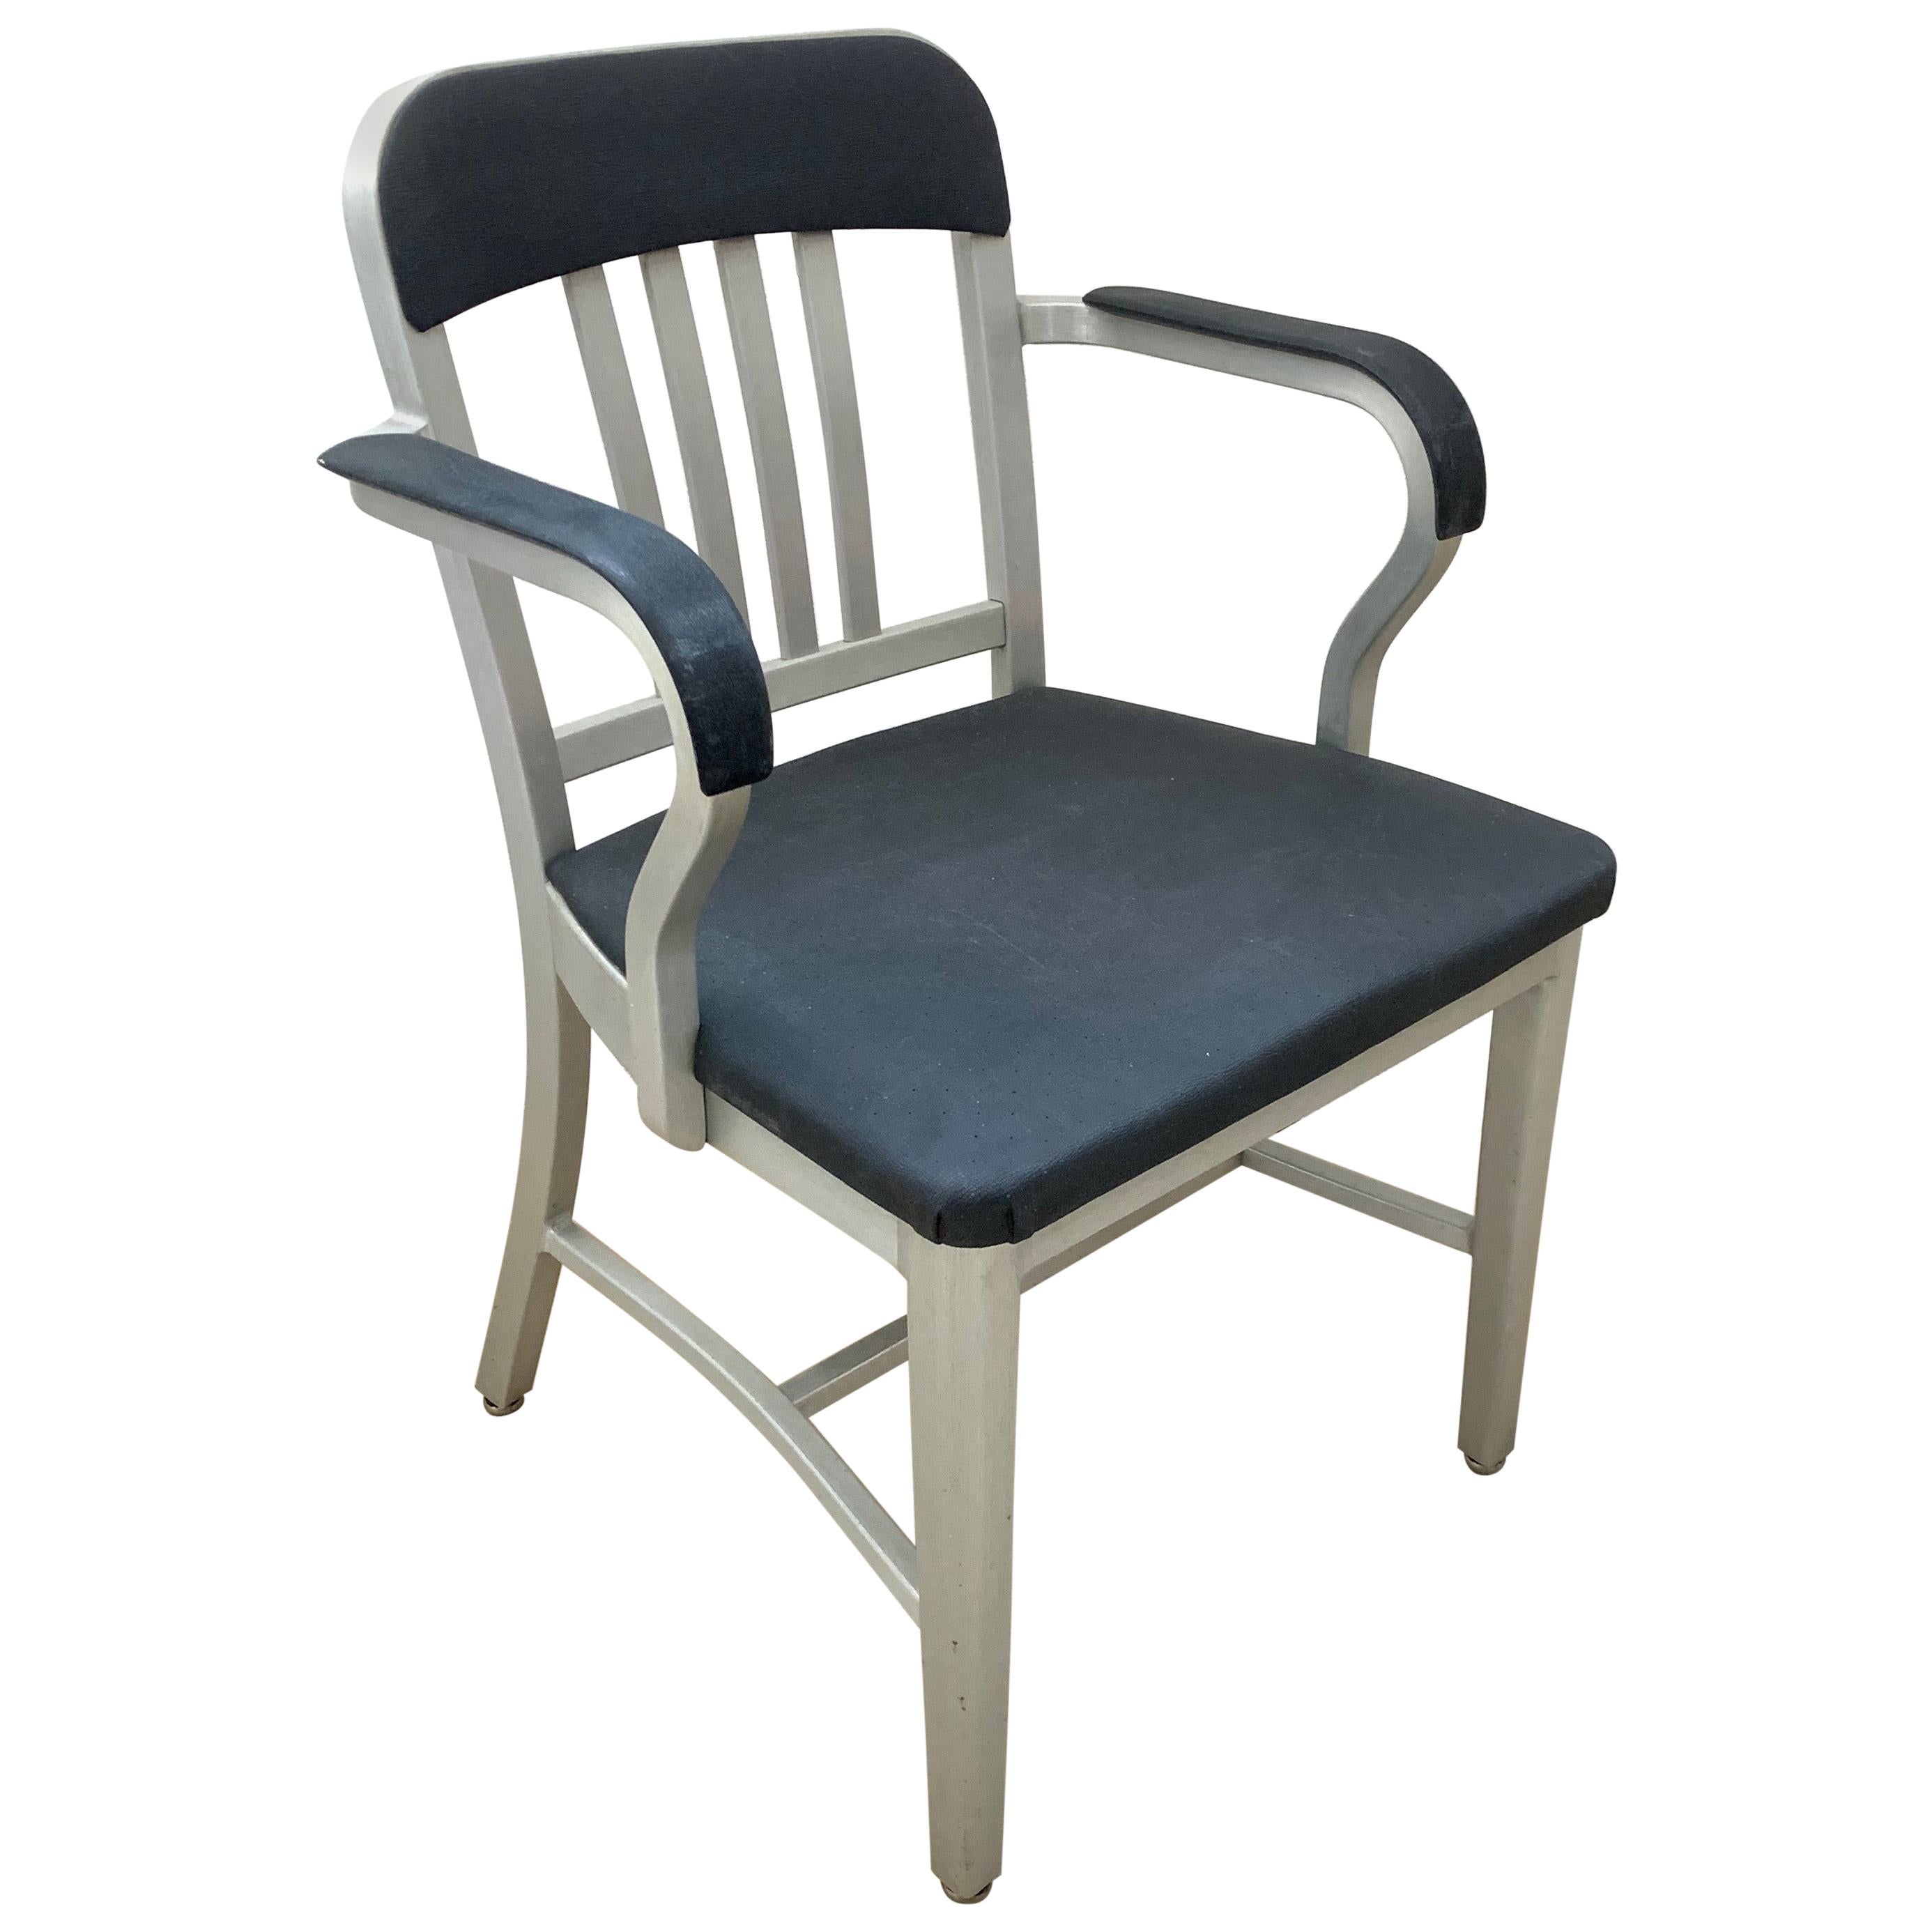 Original Aluminum and Perforated Vinyl Emeco "Navy" Desk or Armchair, 1965 For Sale